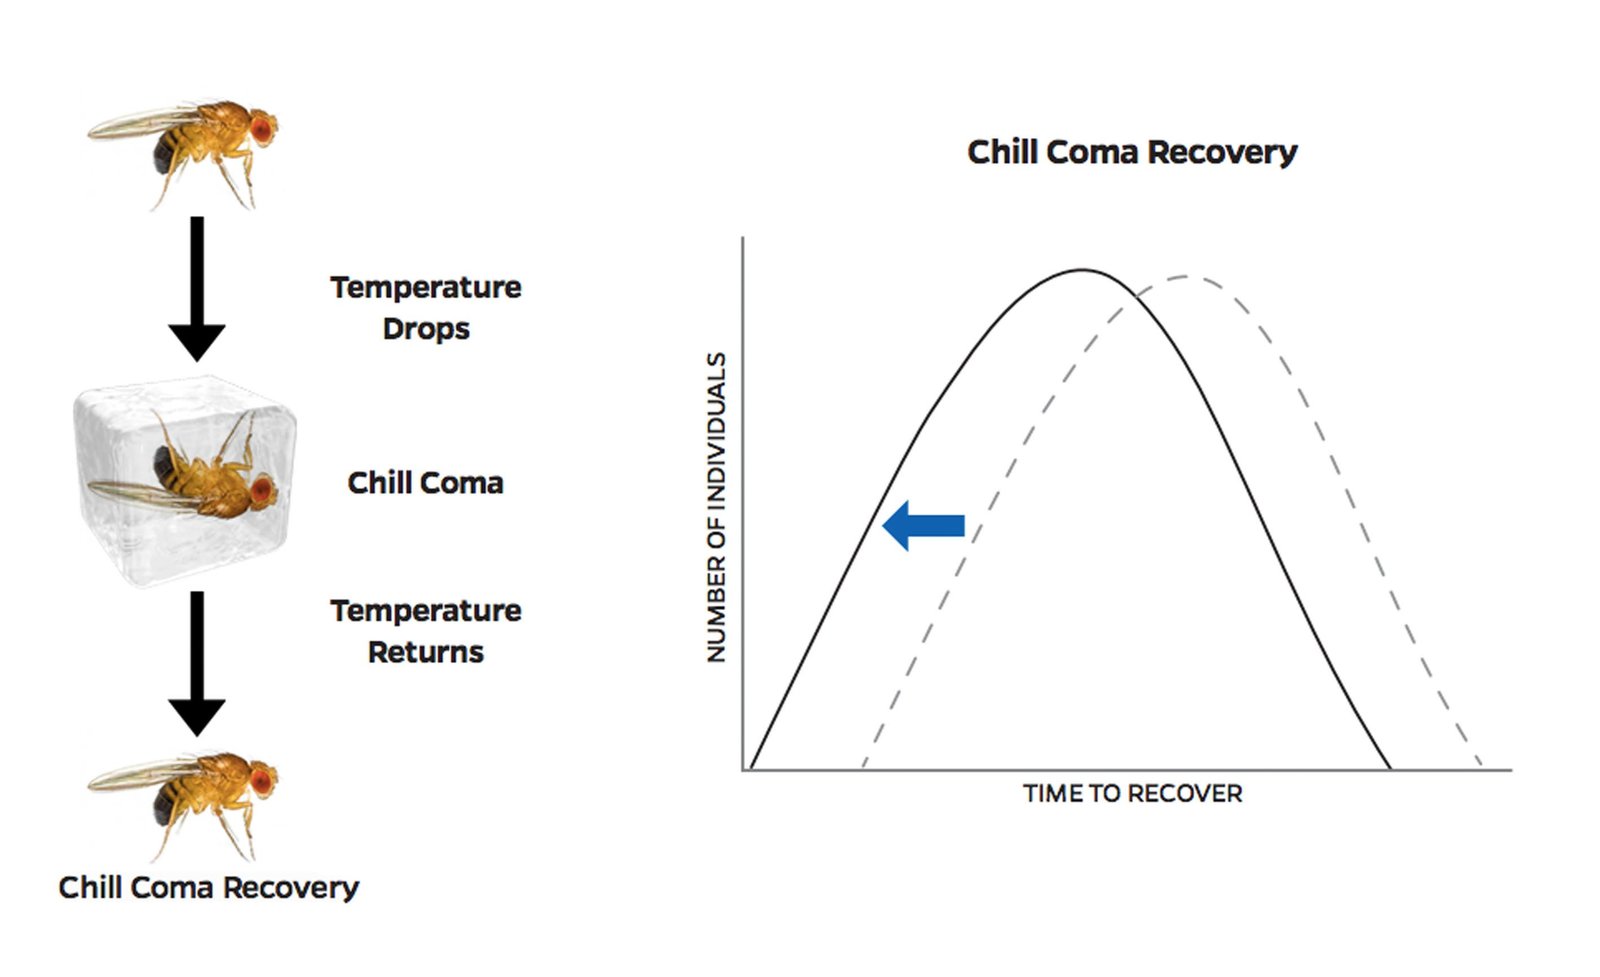 Chill&#x20;coma&#x20;recovery&#x20;test&#x20;is&#x20;used&#x20;as&#x20;a&#x20;tool&#x20;to&#x20;study&#x20;the&#x20;genetics&#x20;of&#x20;fruit&#x20;flies